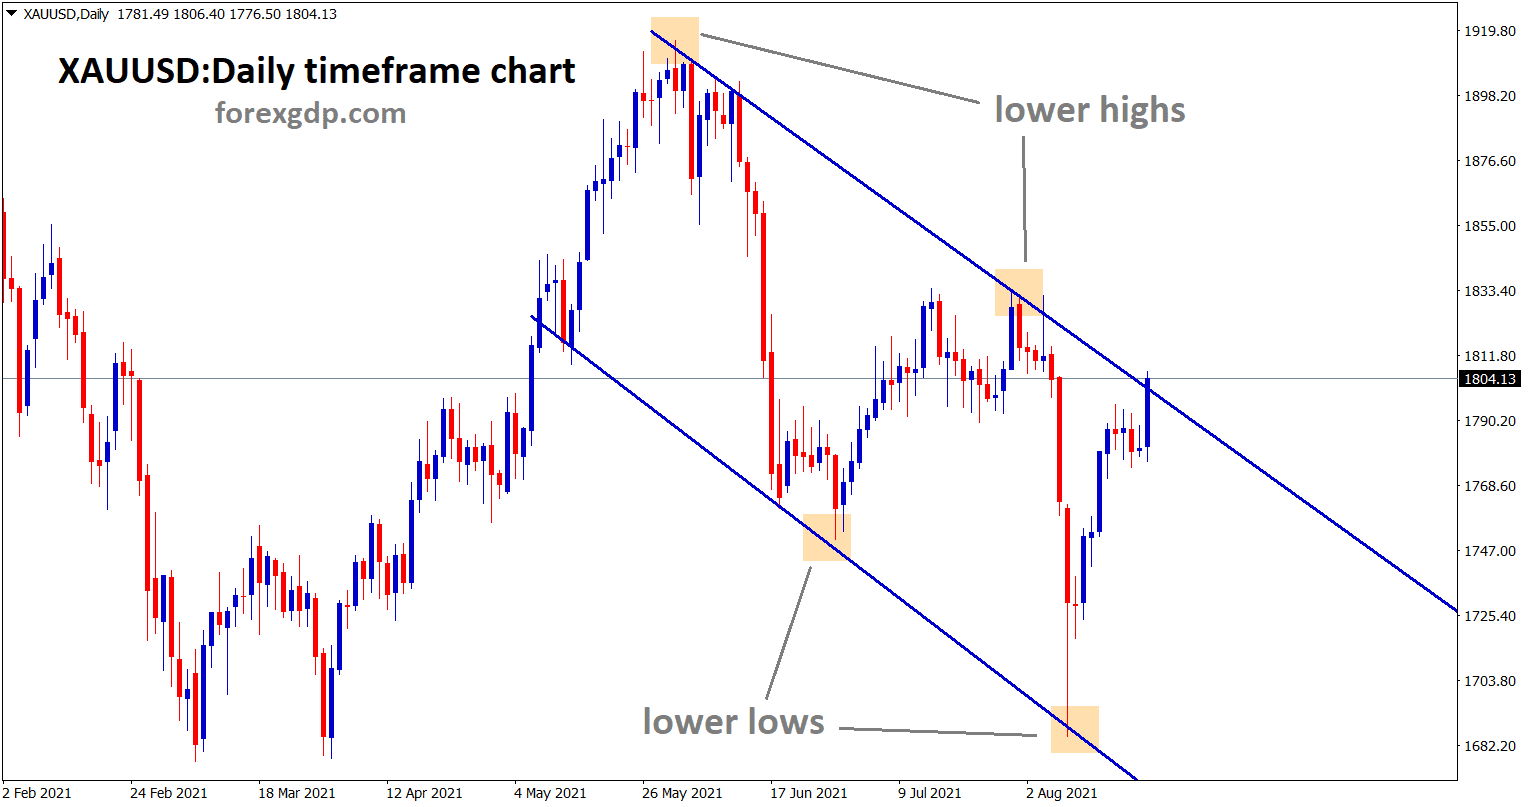 Gold XAUUSD hits lower high area of the descending channel wait for the confirmation of reversal or strong breakout.